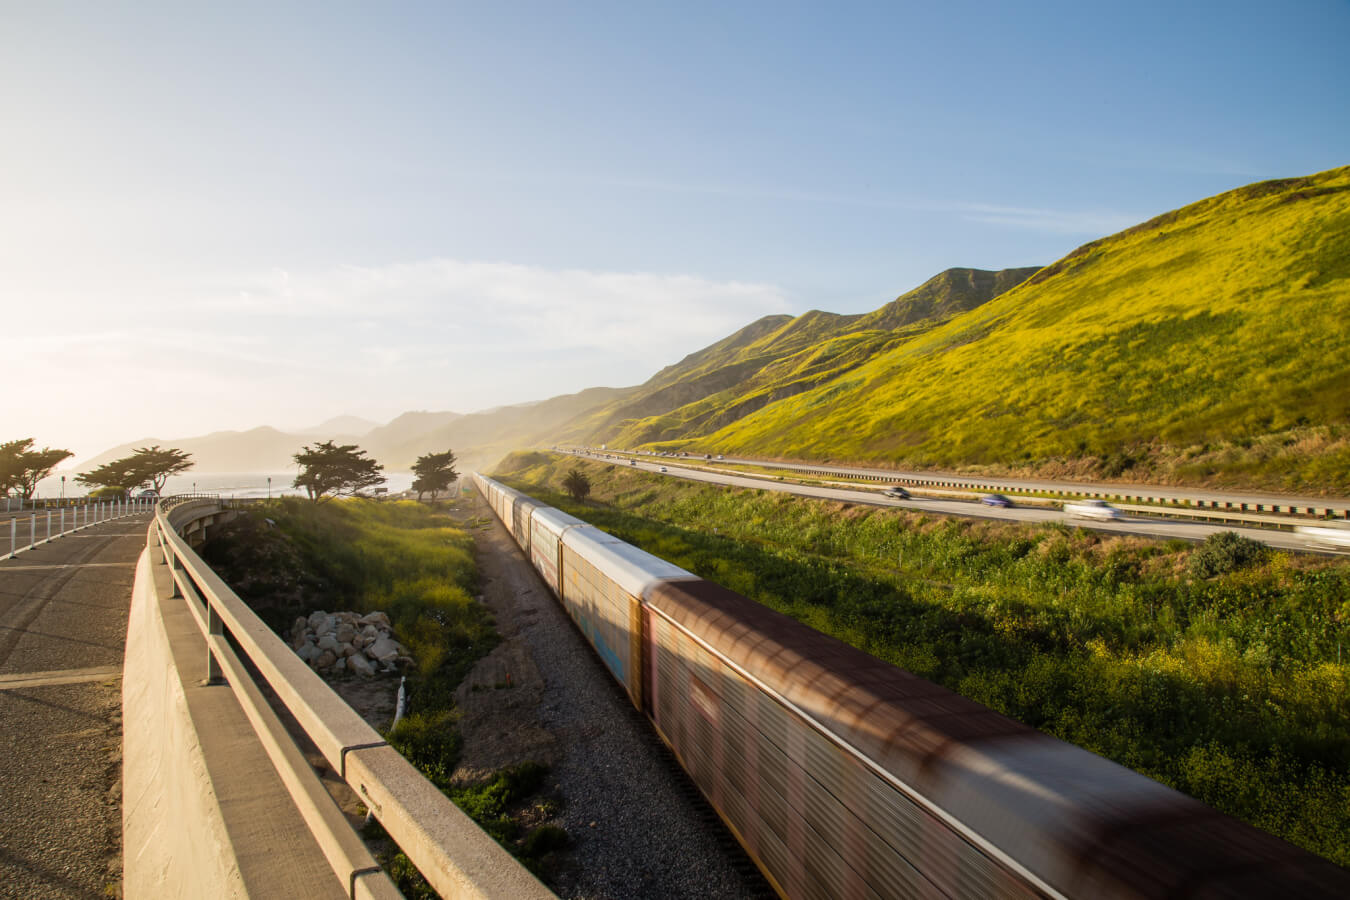 4 Reasons Why You Should Visit Ventura by Train